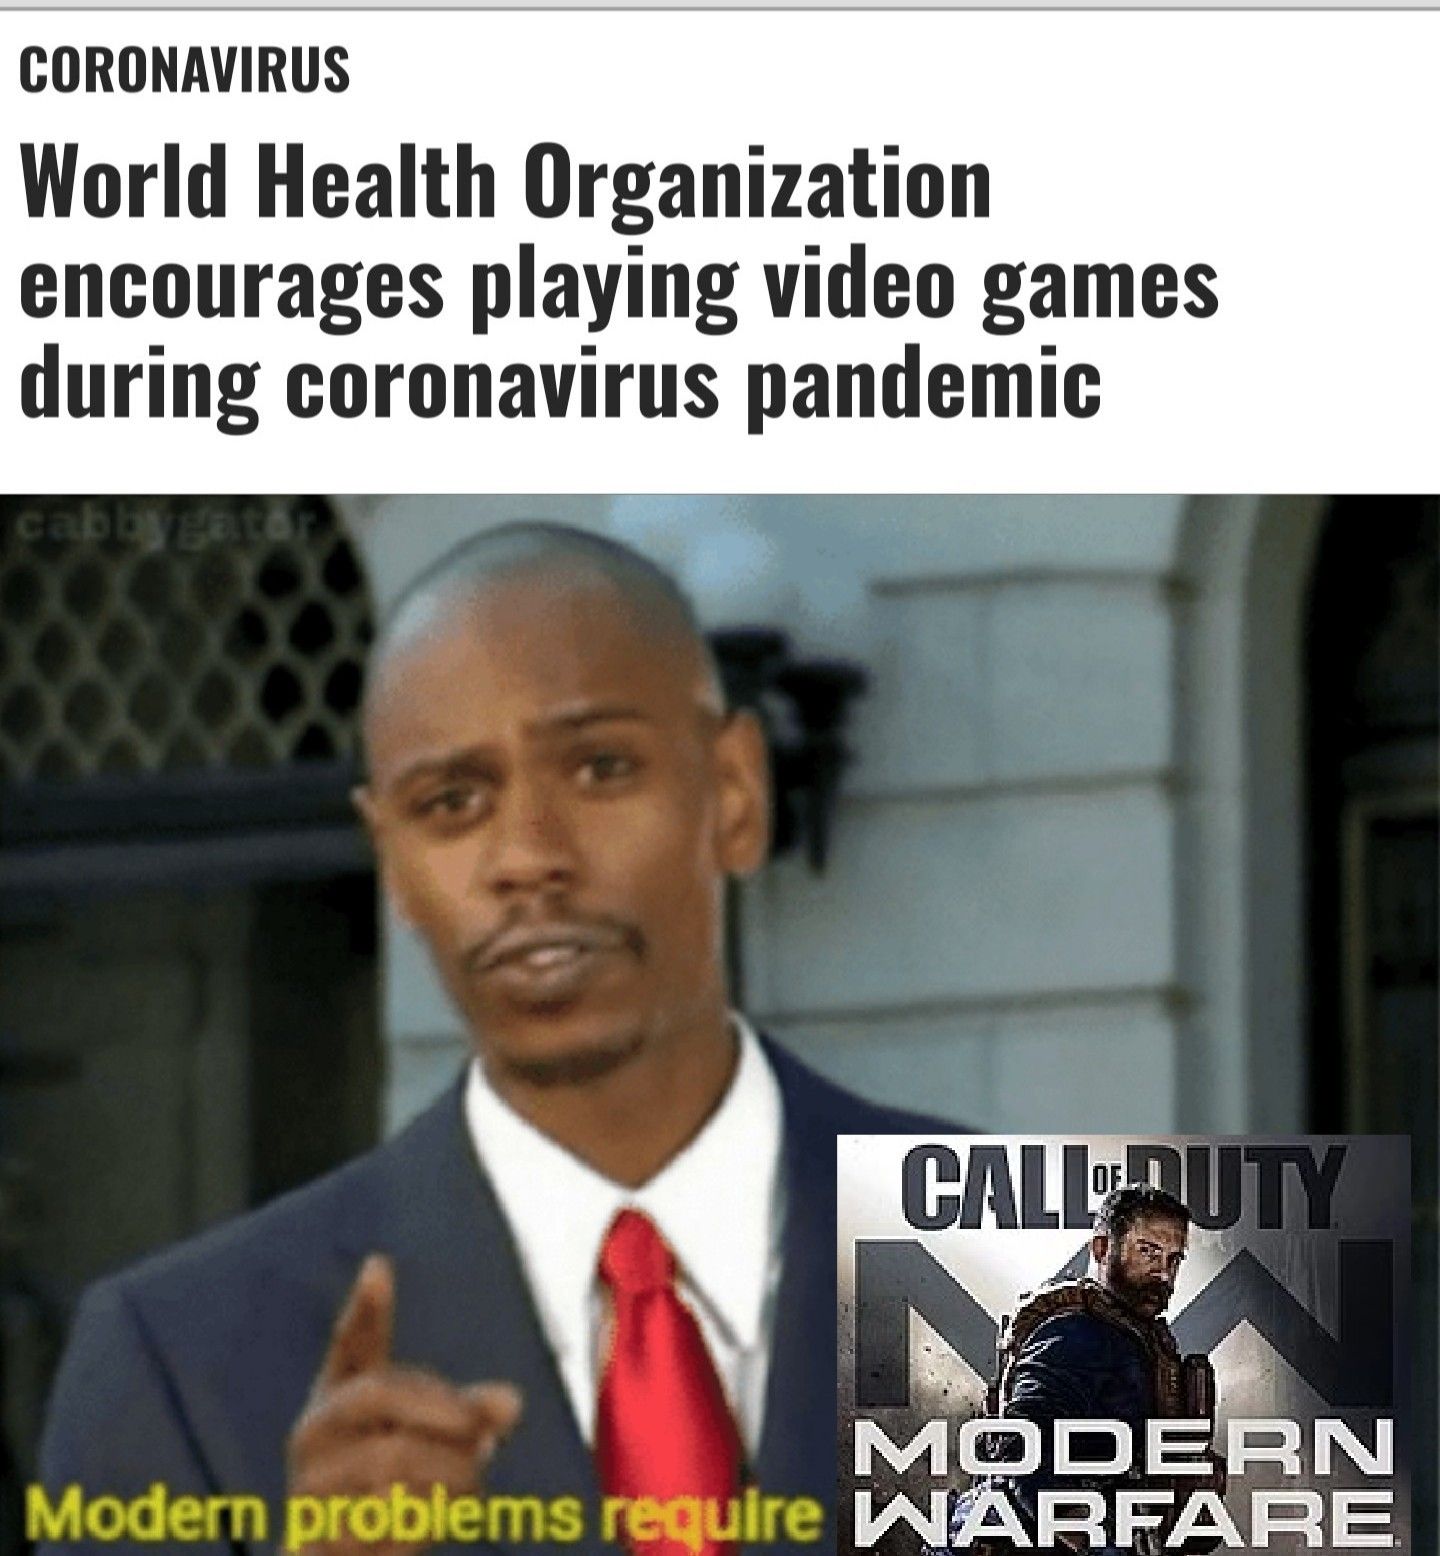 Playing COD during quarantine is good for health.